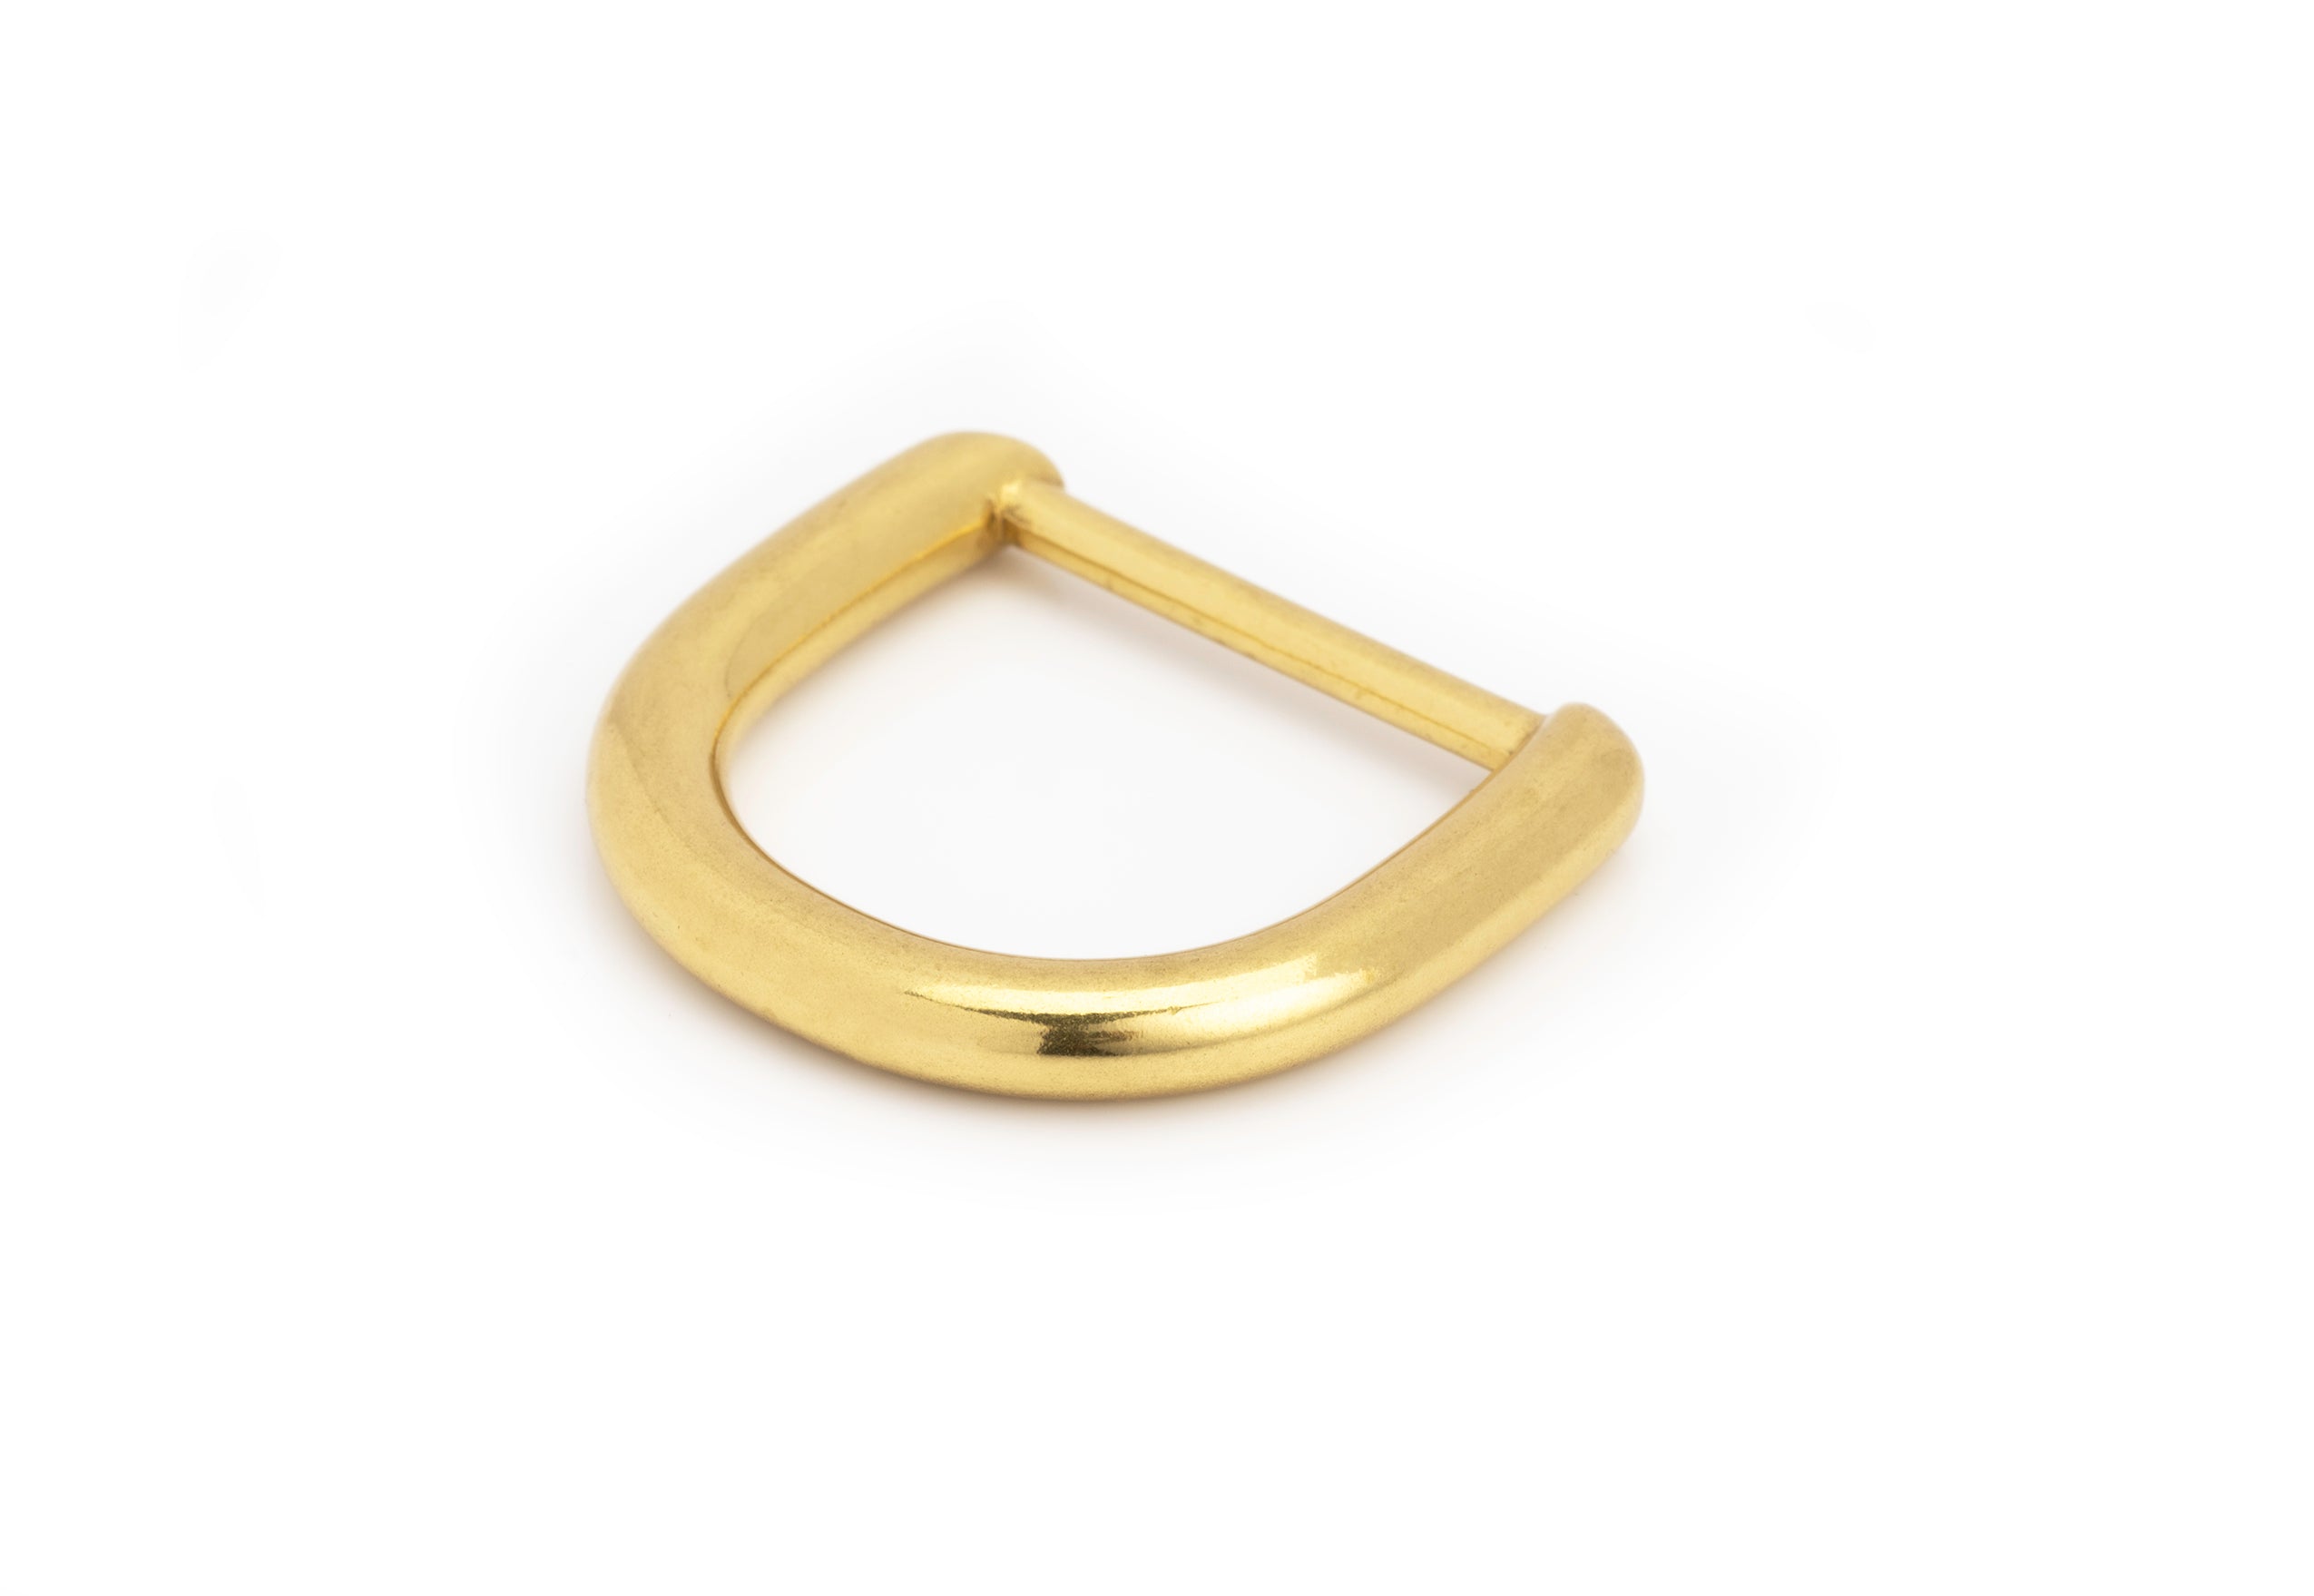 Heavy duty solid brass rings no seam – DMleather